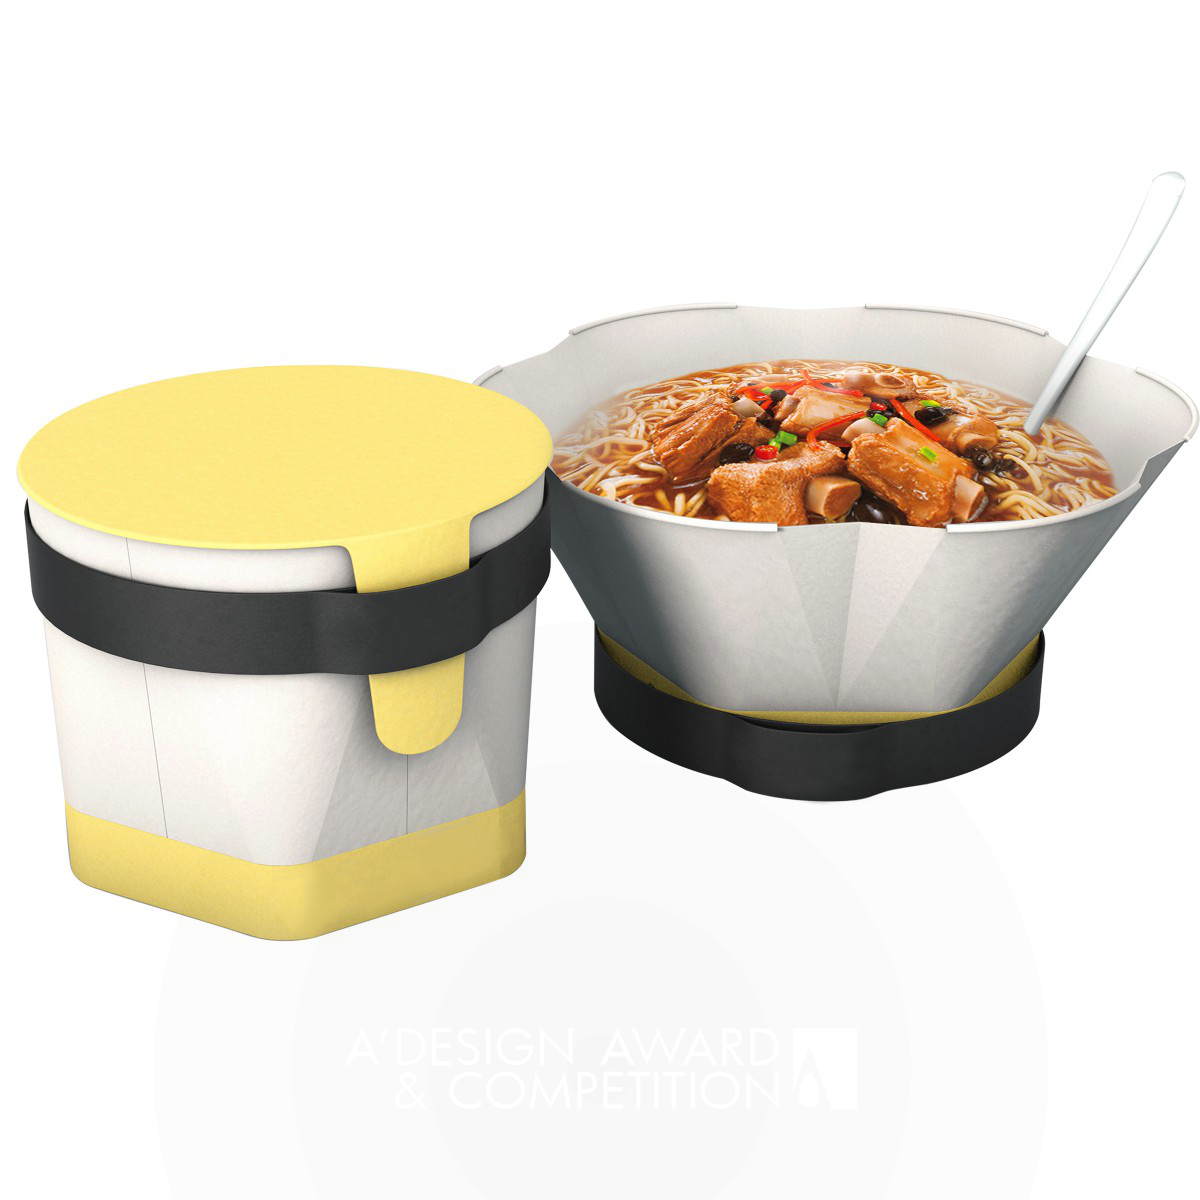 Enjoy your moment Instant noodle packing box by Chen Yuru